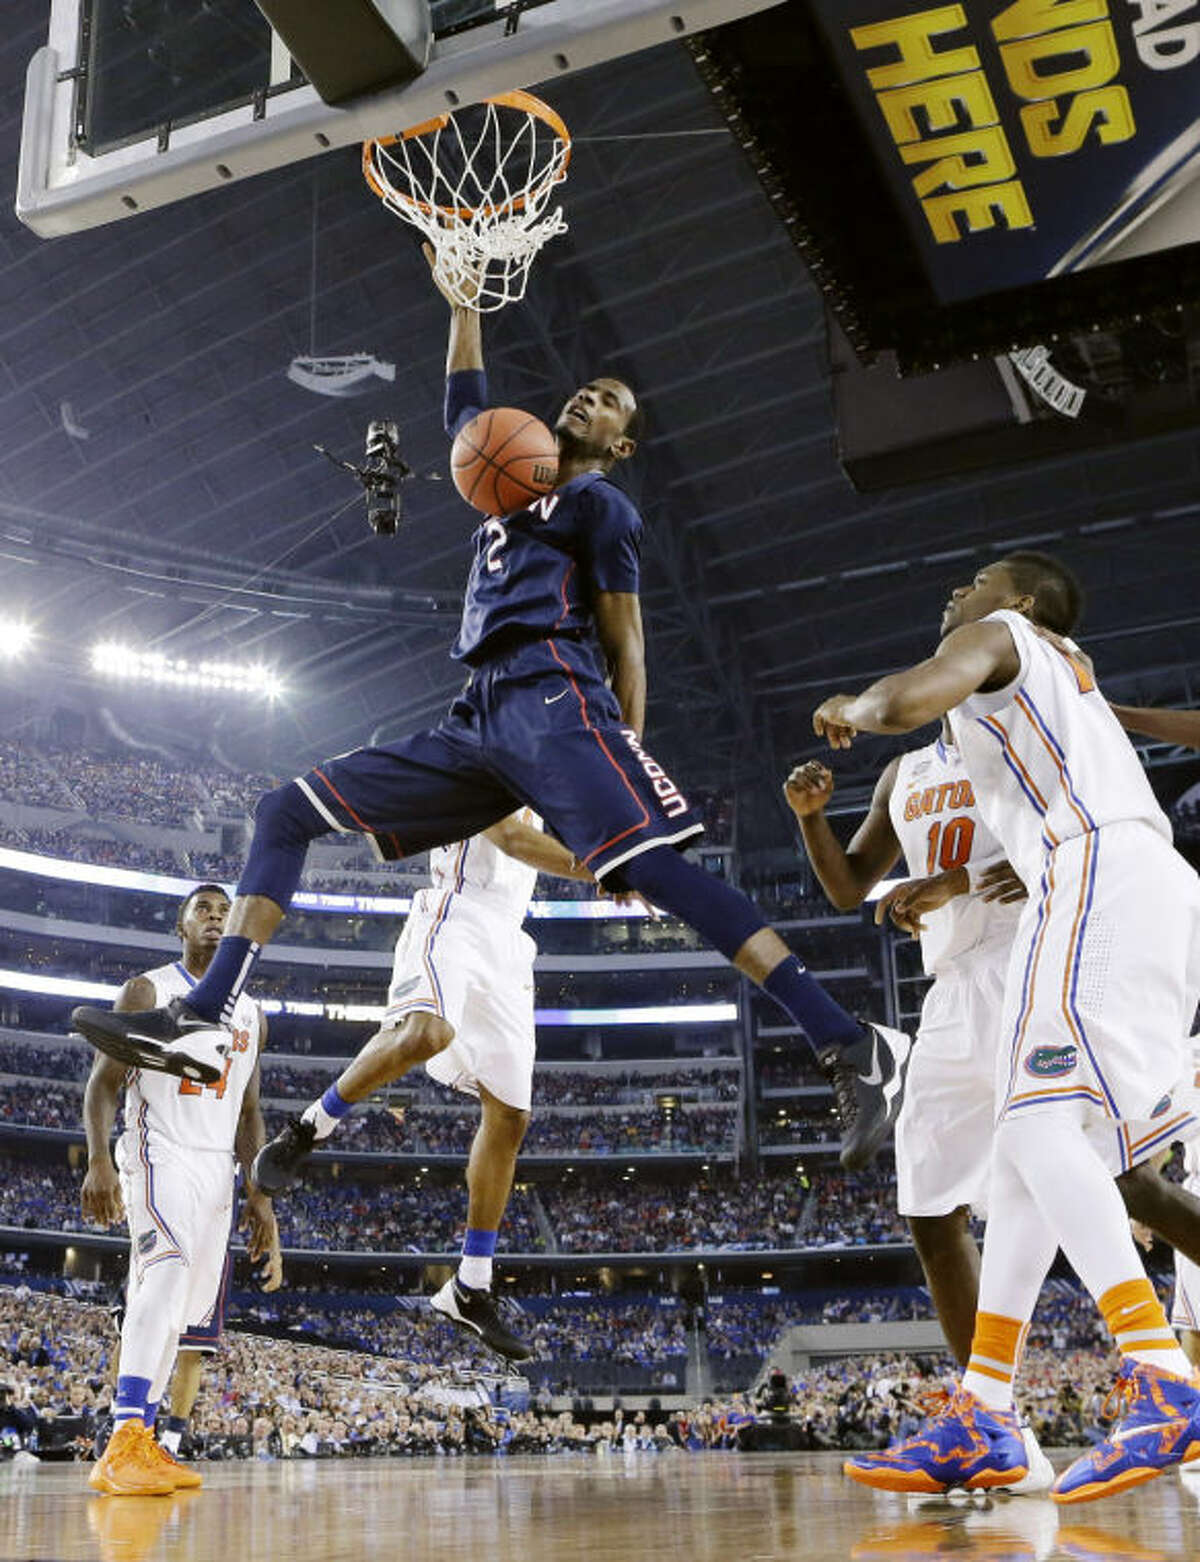 Connecticut forward DeAndre Daniels (2) dunks the ball against Florida during the second half of the NCAA Final Four tournament college basketball semifinal game Saturday, April 5, 2014, in Arlington, Texas. (AP Photo/Eric Gay)